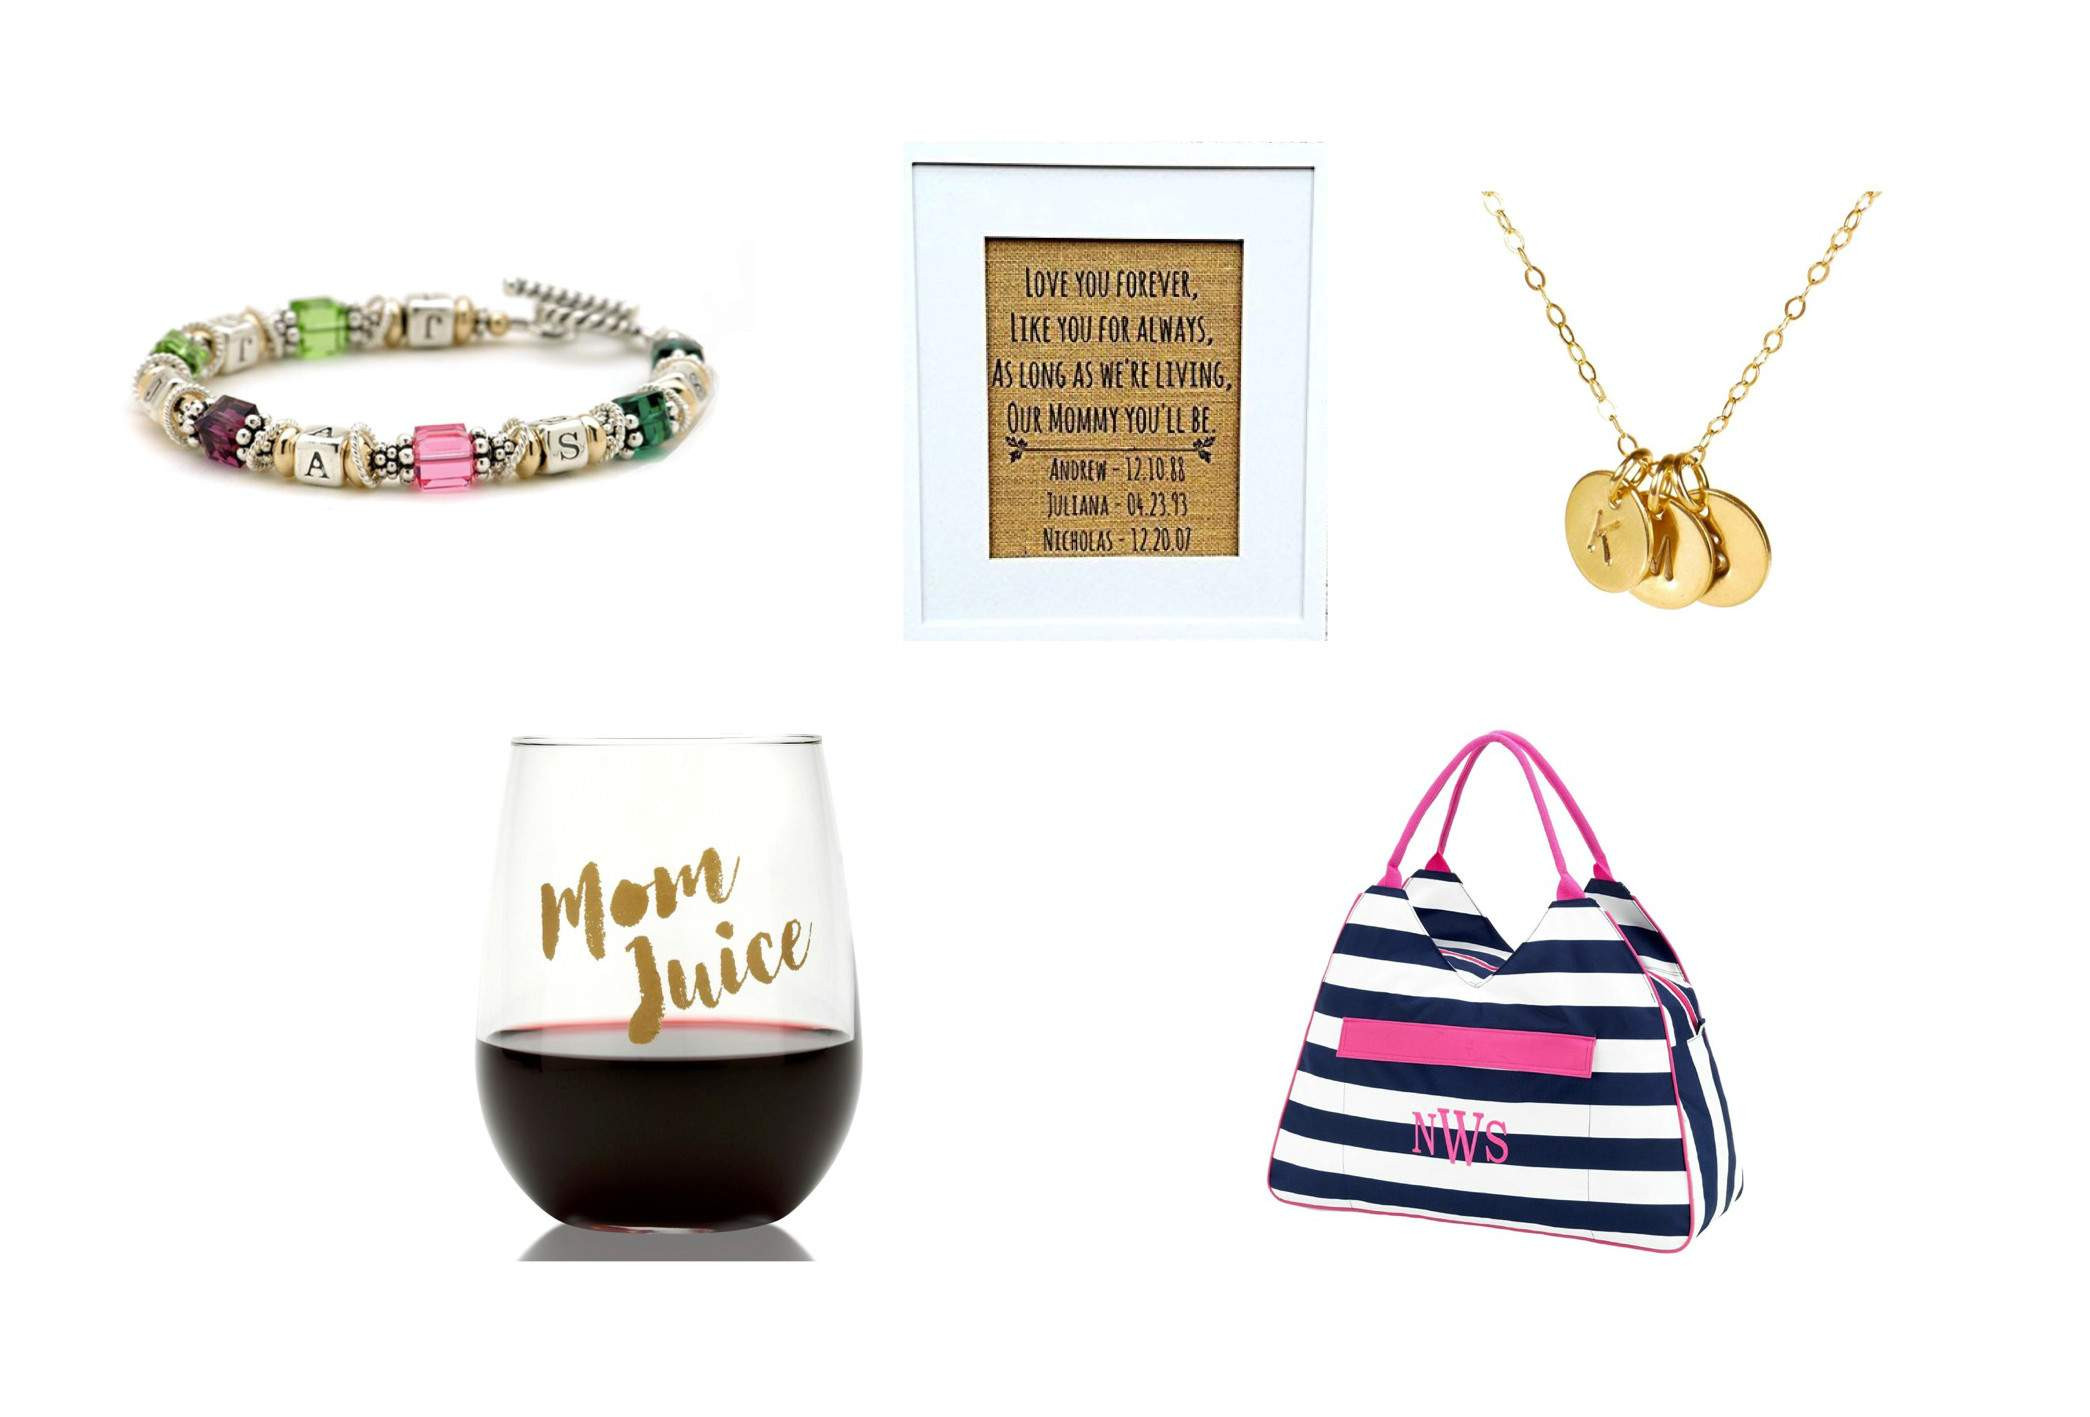 Personalized Mother'S Day Gift Ideas
 Top 10 Best Personalized Mother’s Day Gifts for New Moms